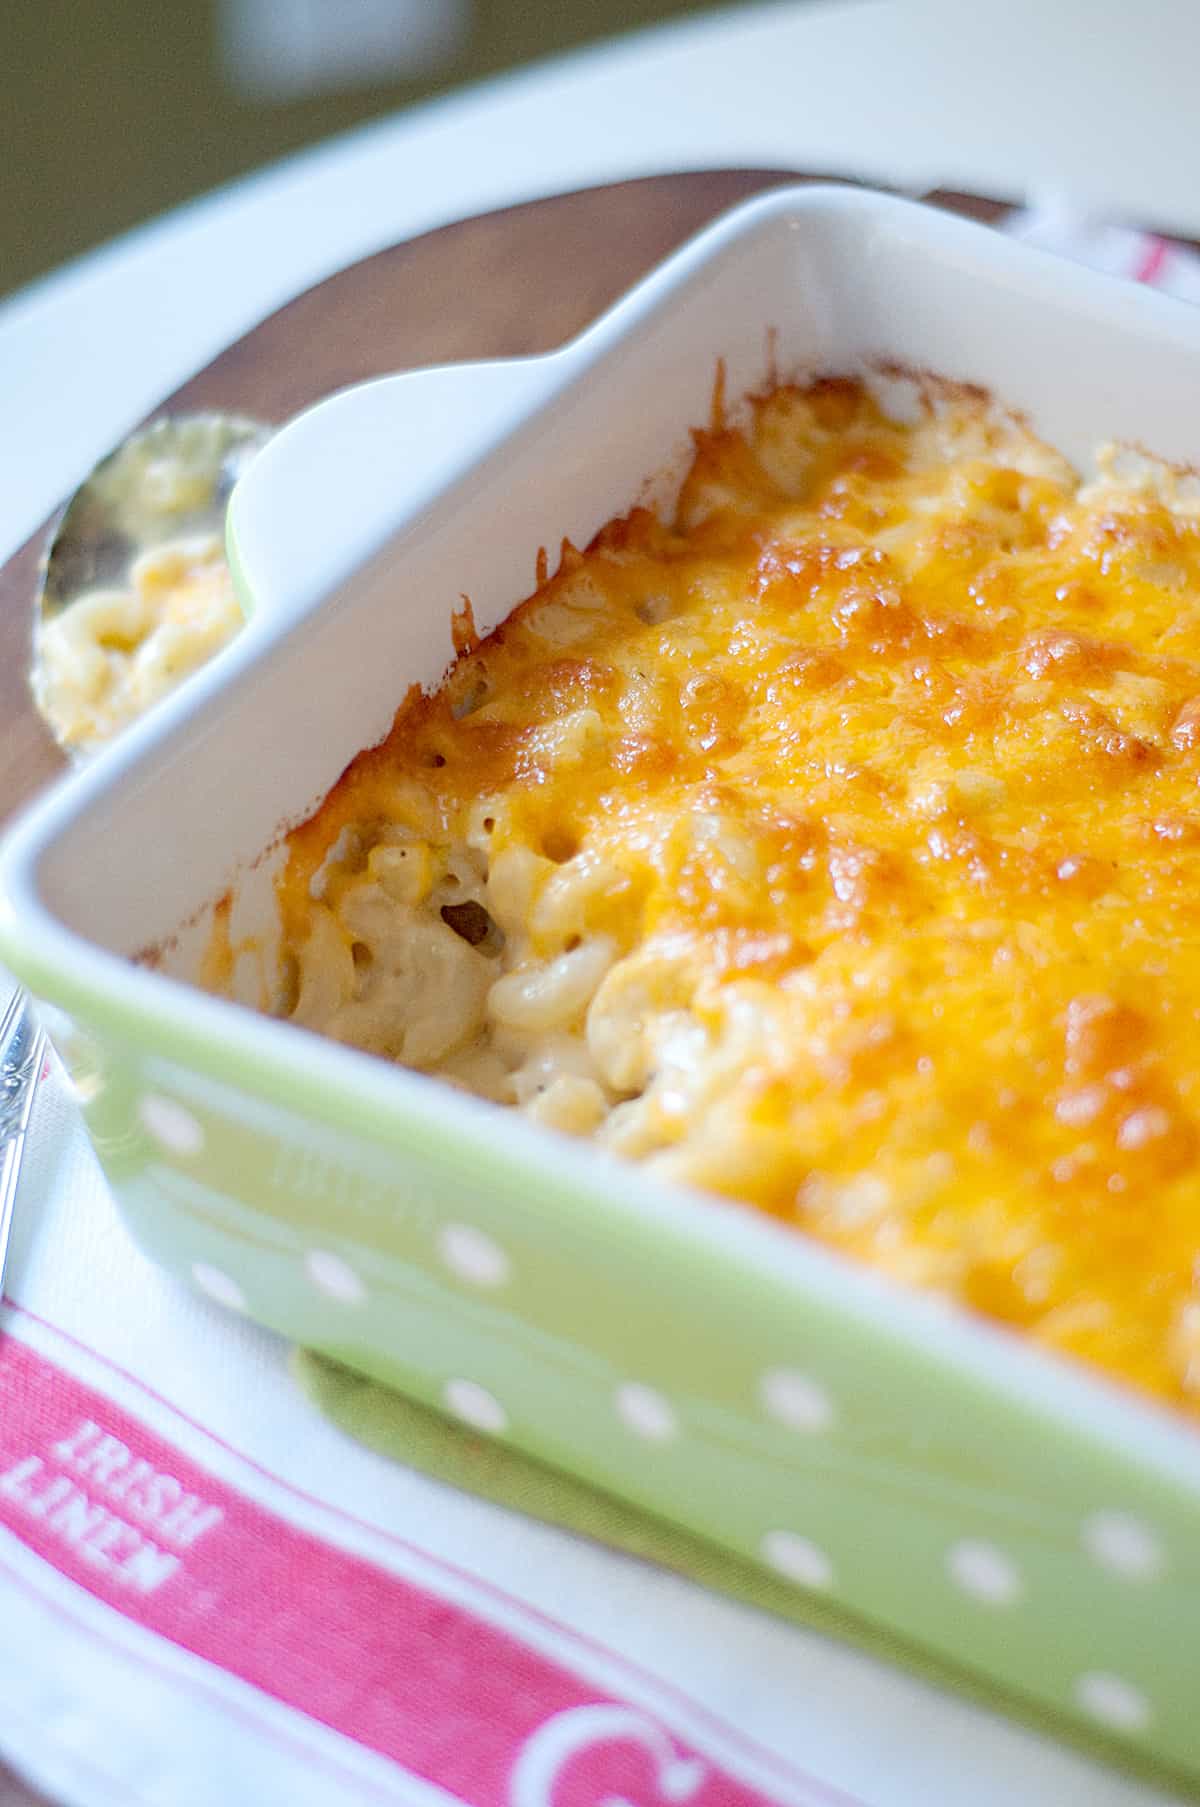 Finished macaroni and cheese in a baking dish.